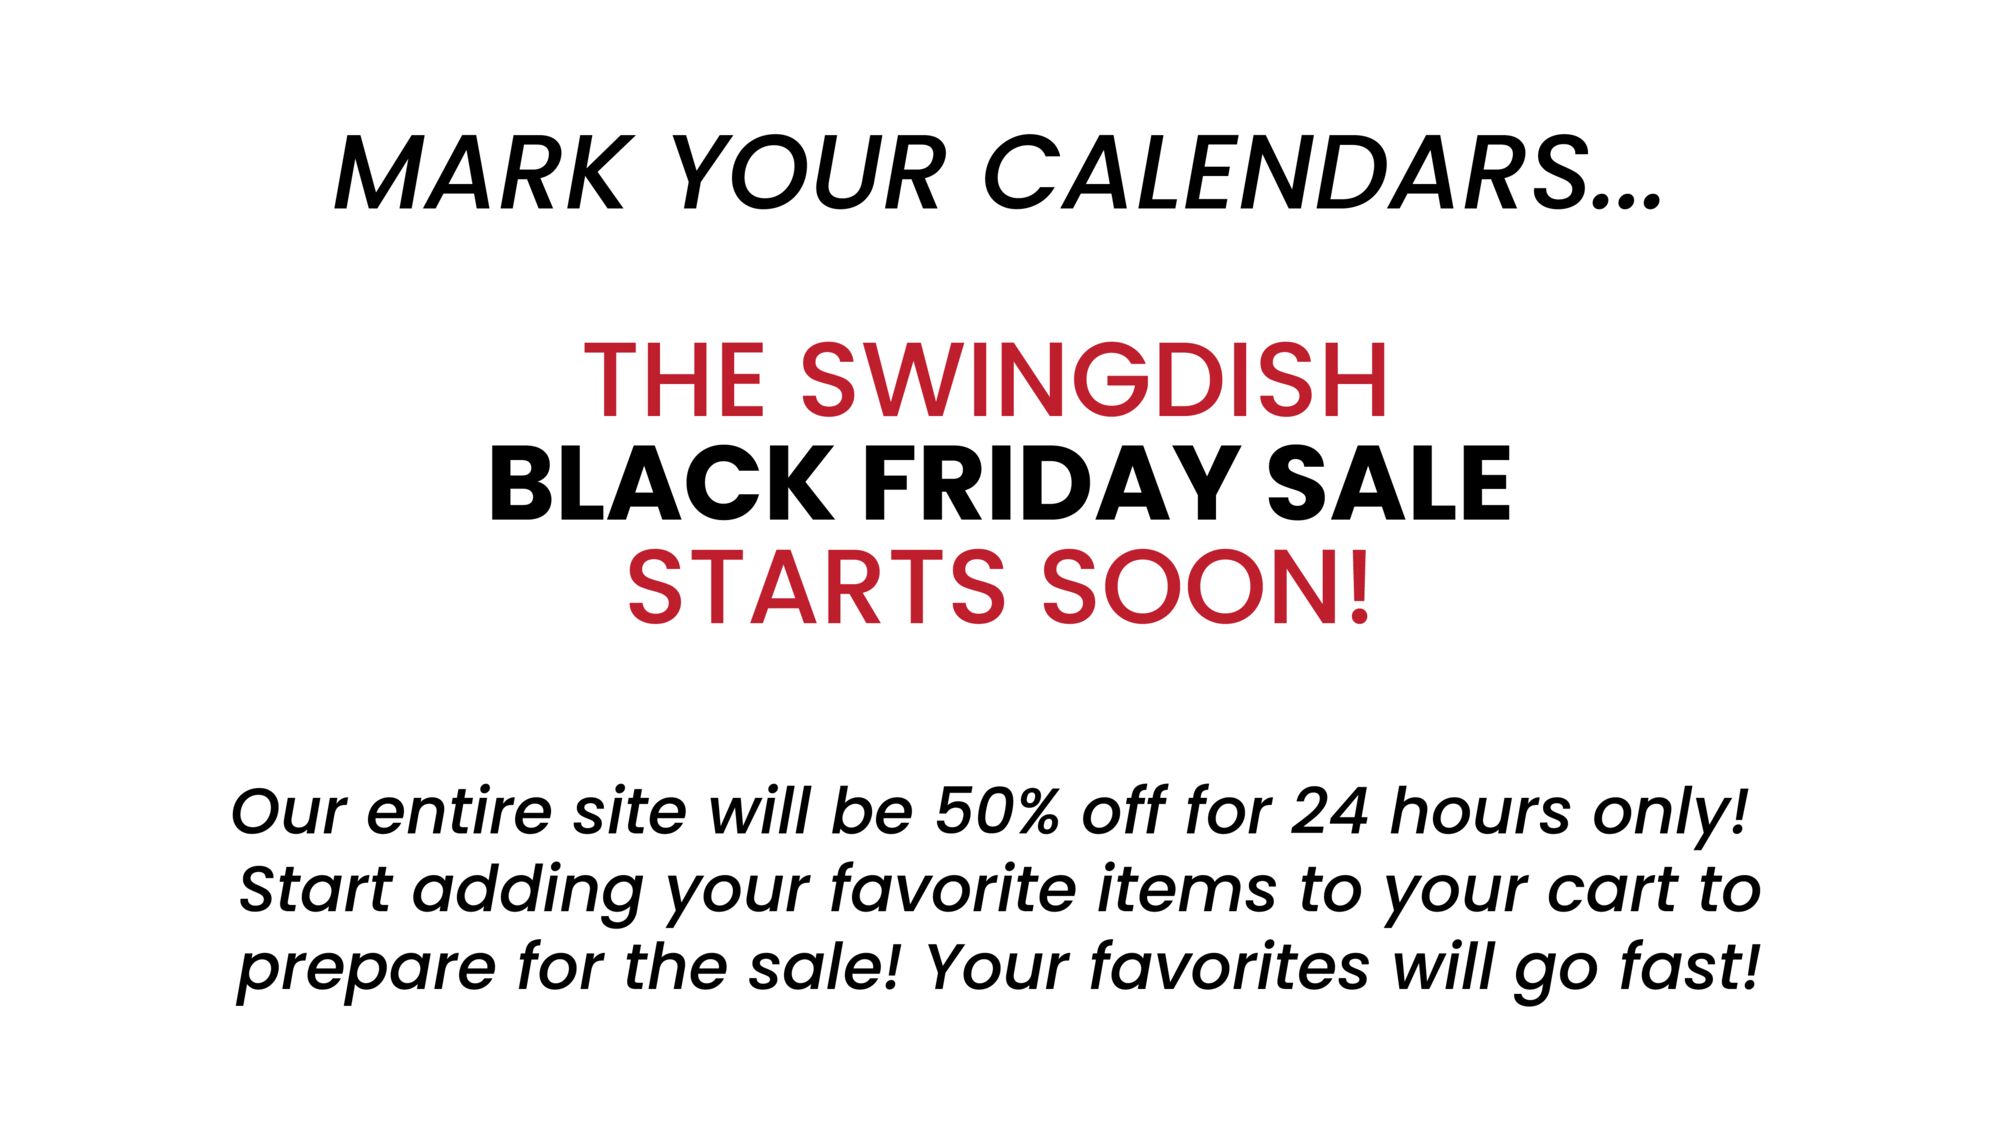 MARK YOUR CALENDARS... THE SWINGDISH BLACK FRIDAY SALE STARTS SOON! Our entire site will be 50% off for 24 hours only! Start adding your favorite items to your cart to prepare for the sale! Your favorites will go fast! 